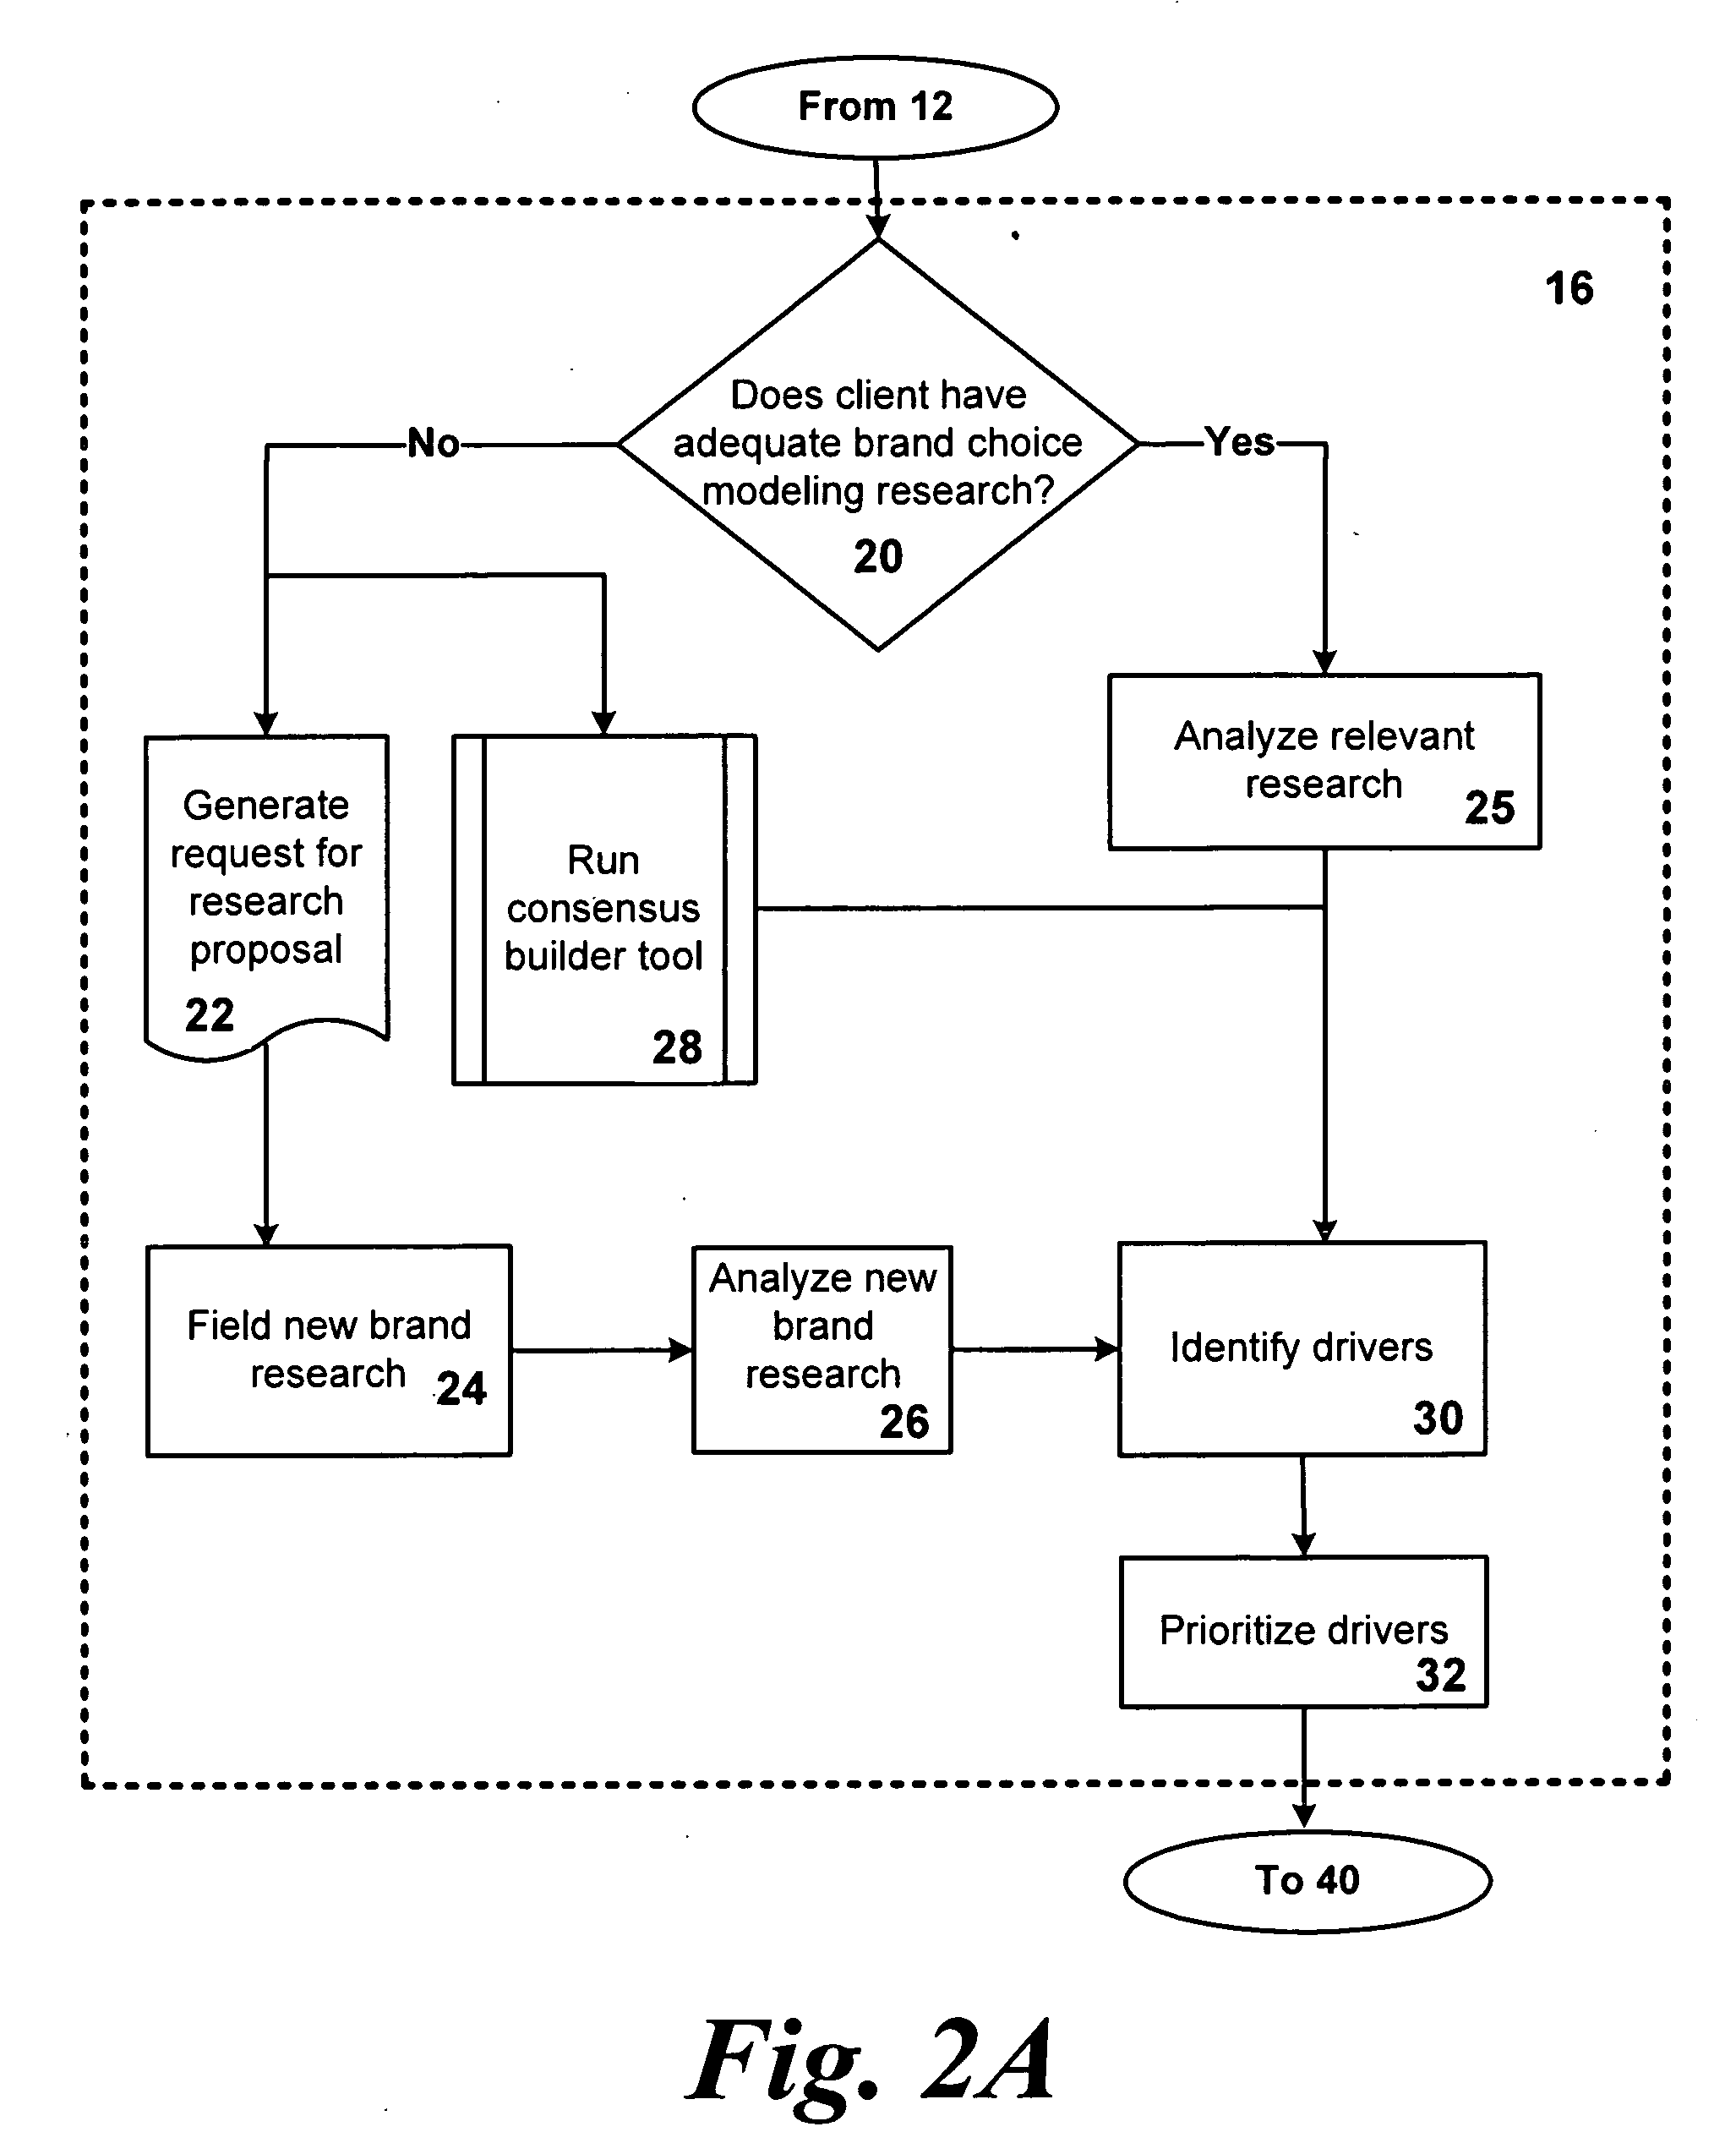 System and method for optimizing product development portfolios and aligning product, brand, and information technology strategies